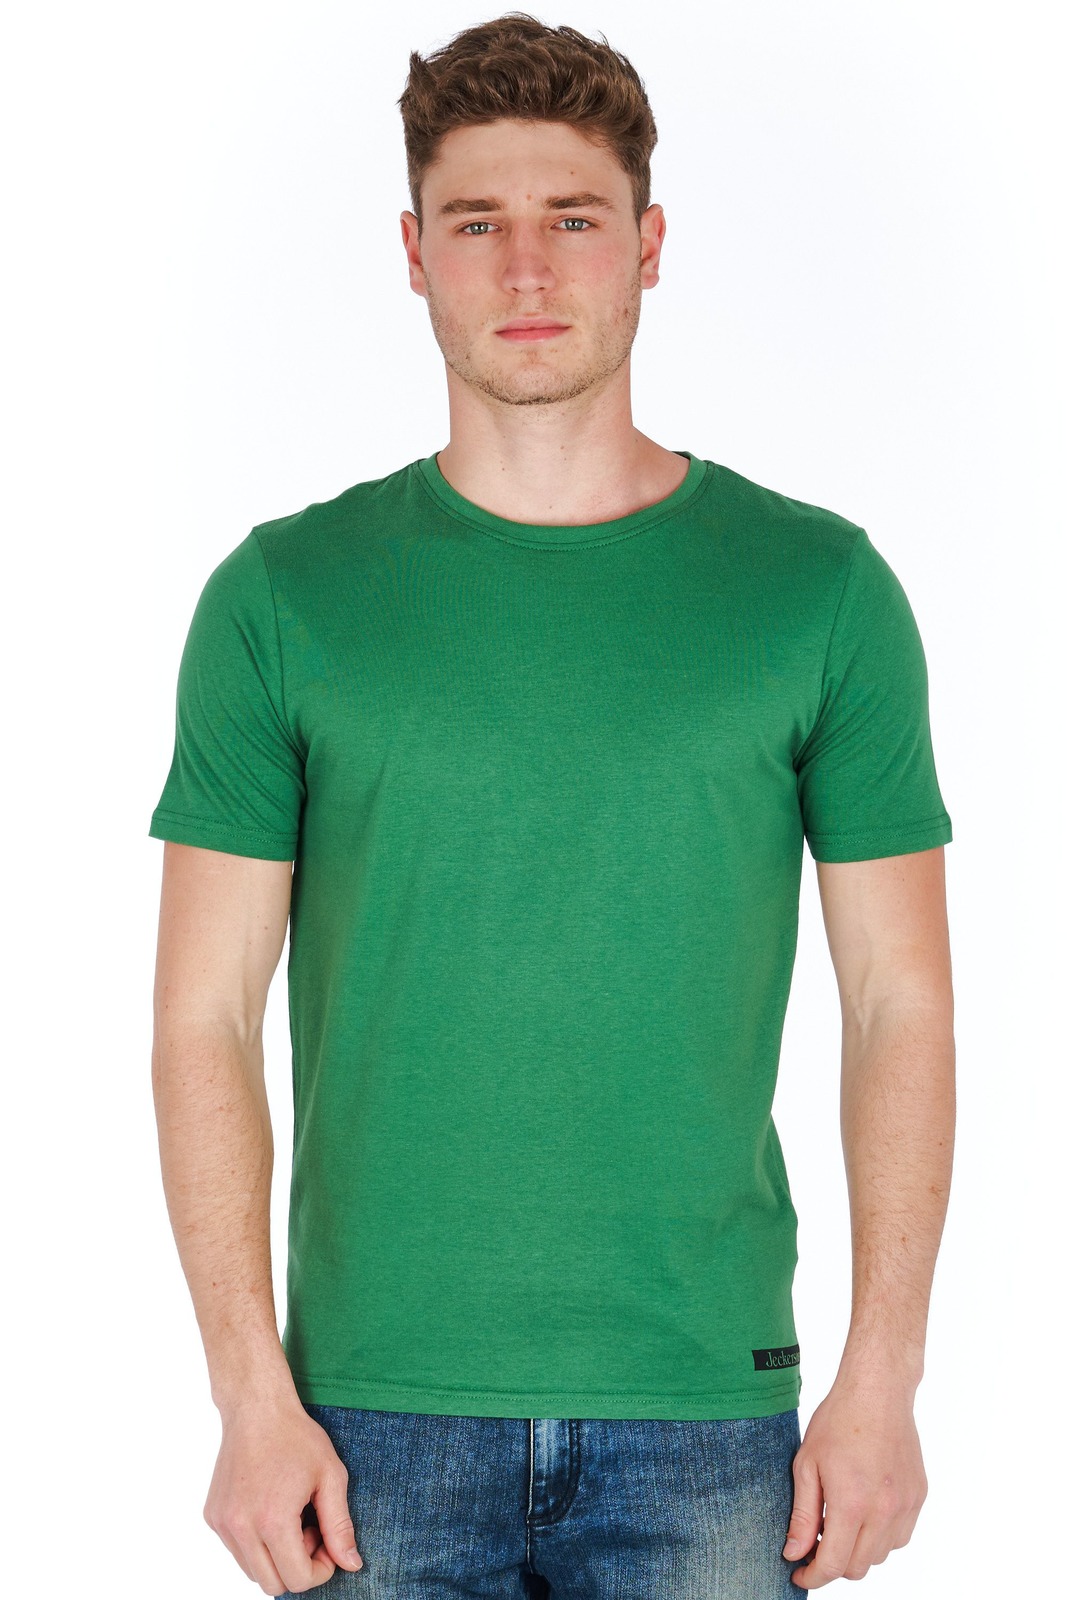 Jeckerson Green T-shirts for Men - ORDINARY